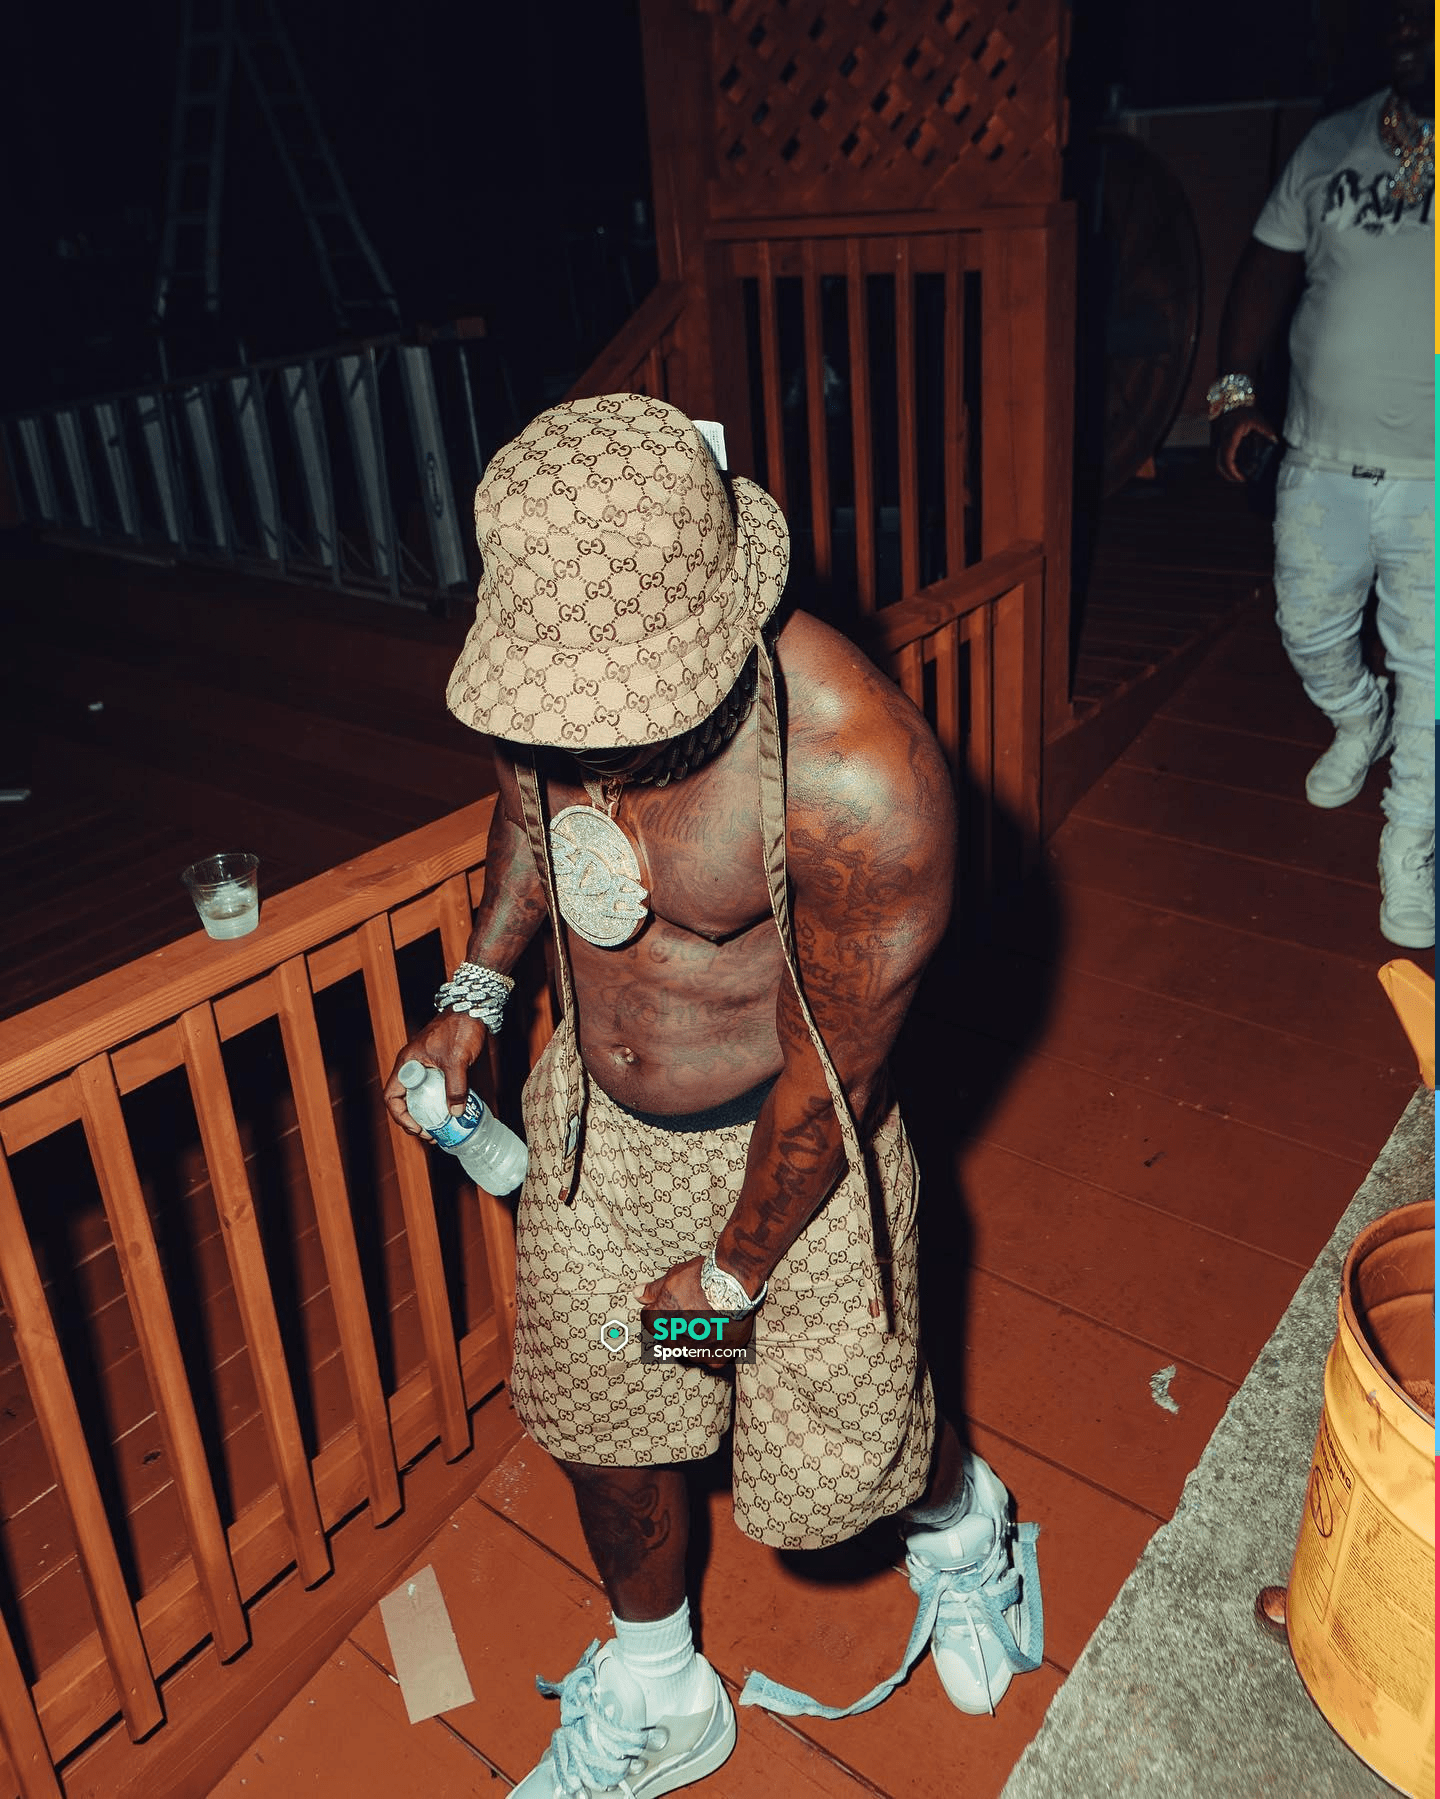 Gucci Beige GG Drawstring Shorts worn by DaBaby on his Instagram account @ dababy